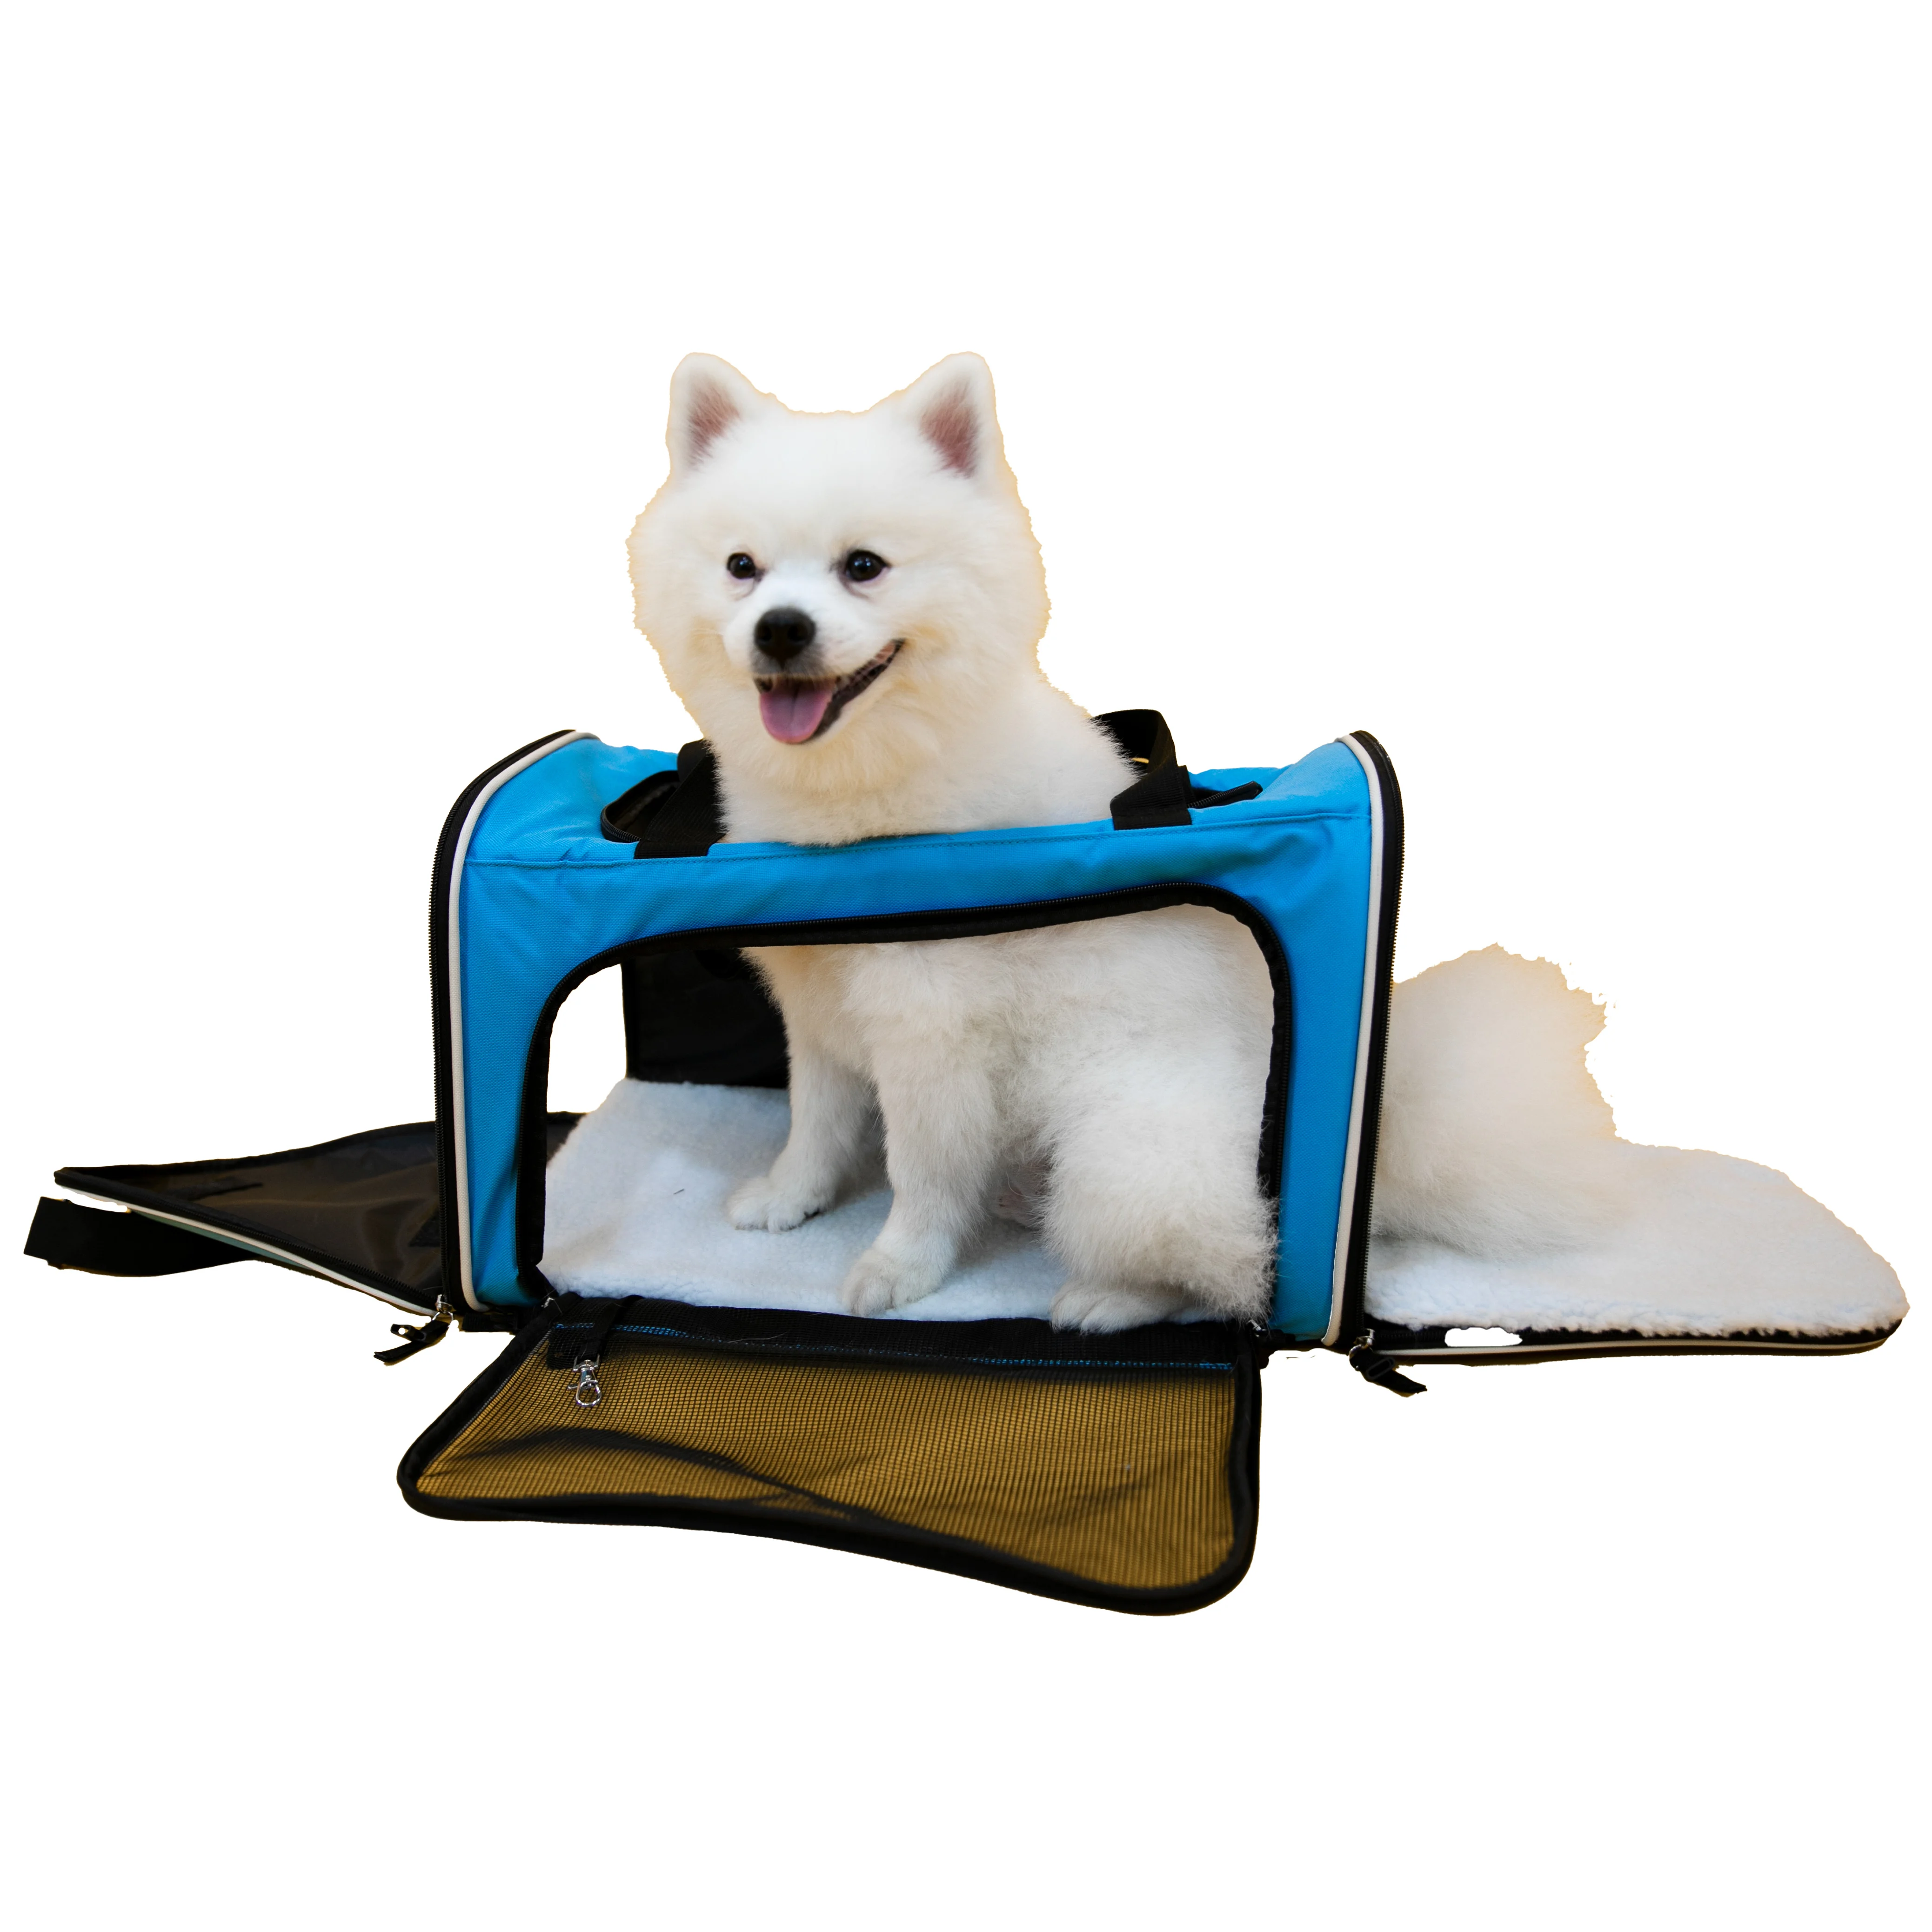 

Carrier Dog Backpack Pet Carrier Bag for Cats and Dogs Small and medium up to 20 LBS Bule, Light blue